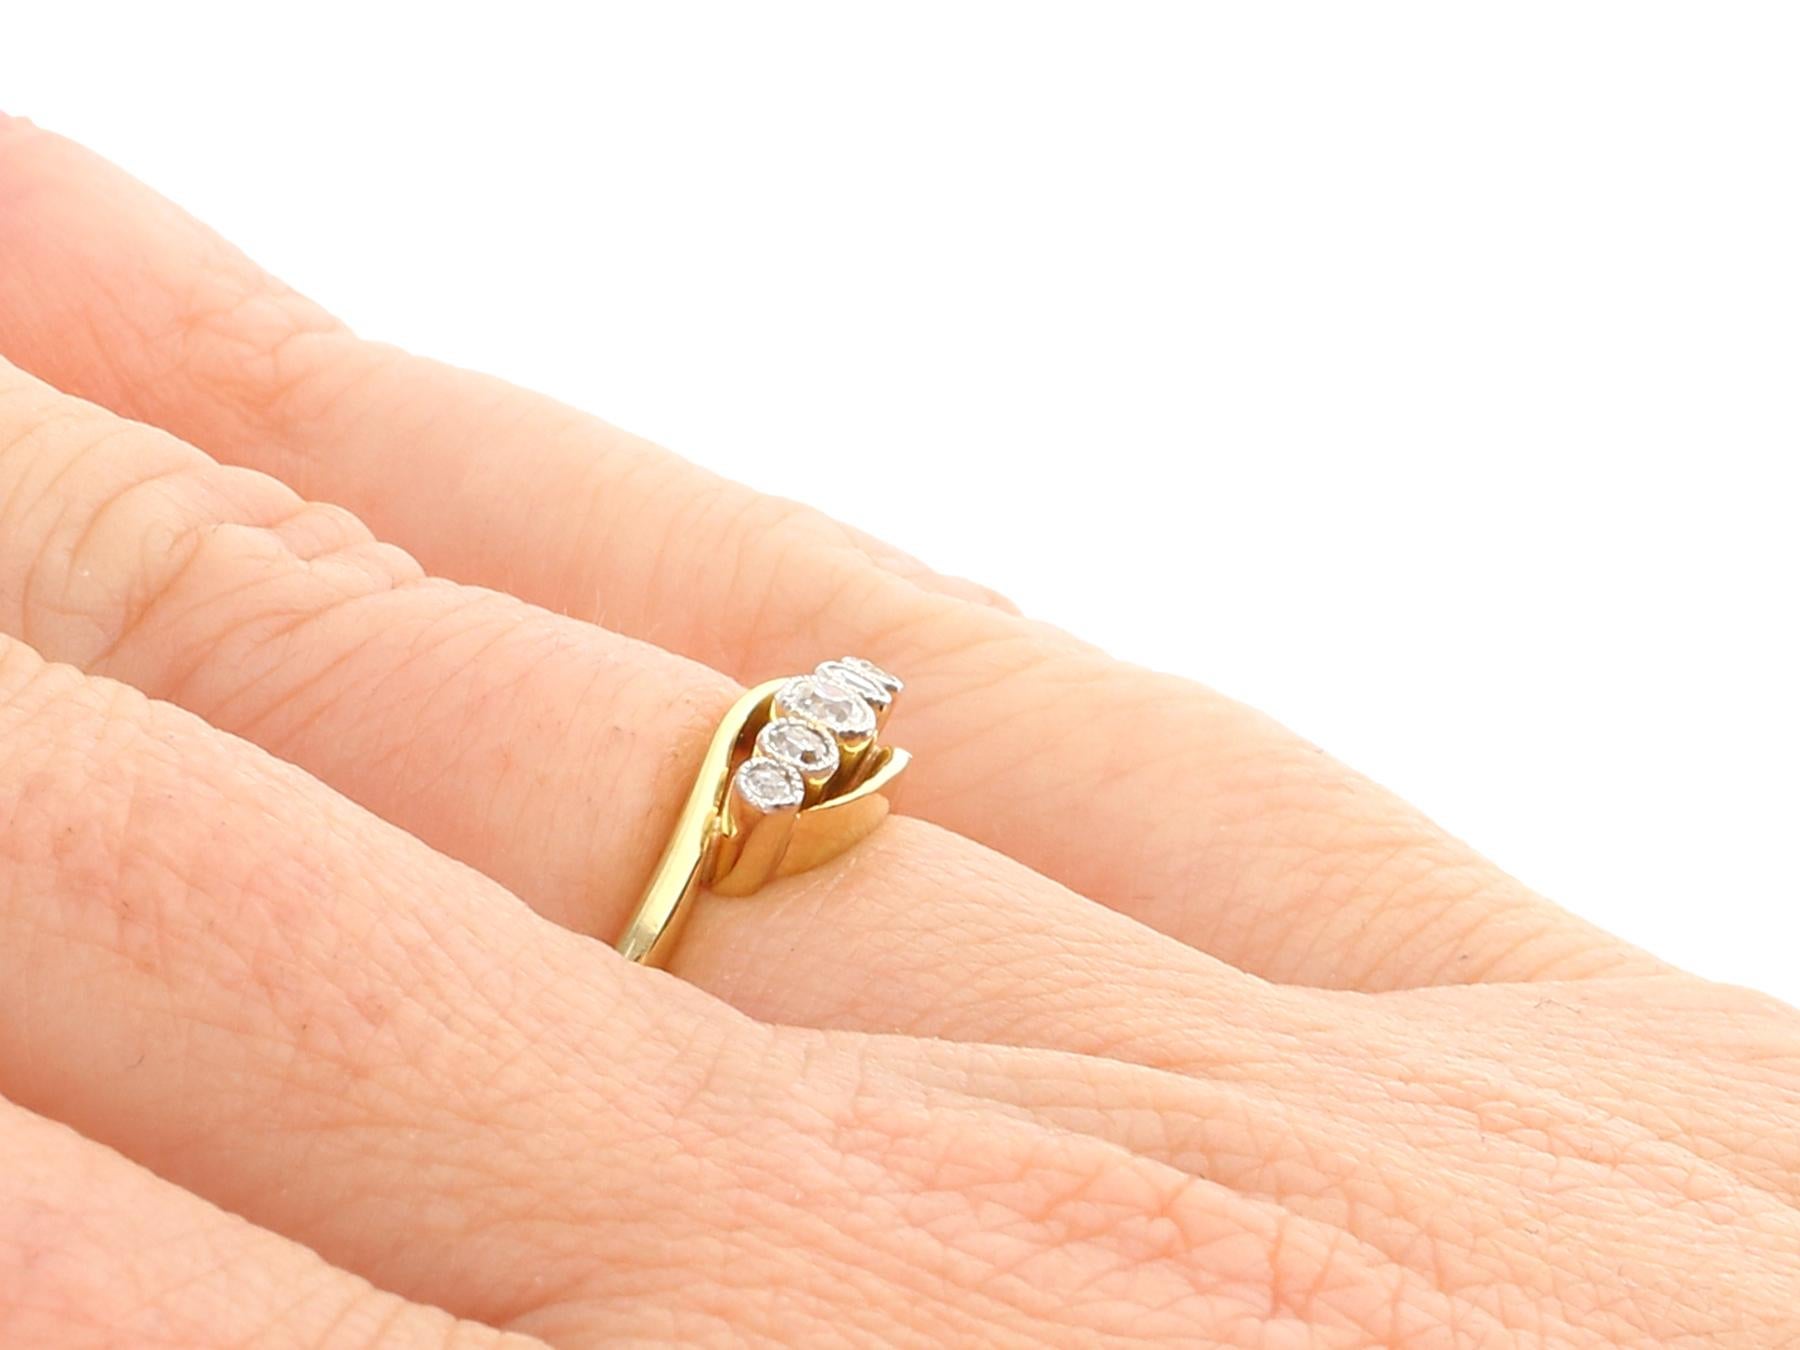 1920s Antique Diamond and Yellow Gold Five-Stone Ring In Excellent Condition For Sale In Jesmond, Newcastle Upon Tyne